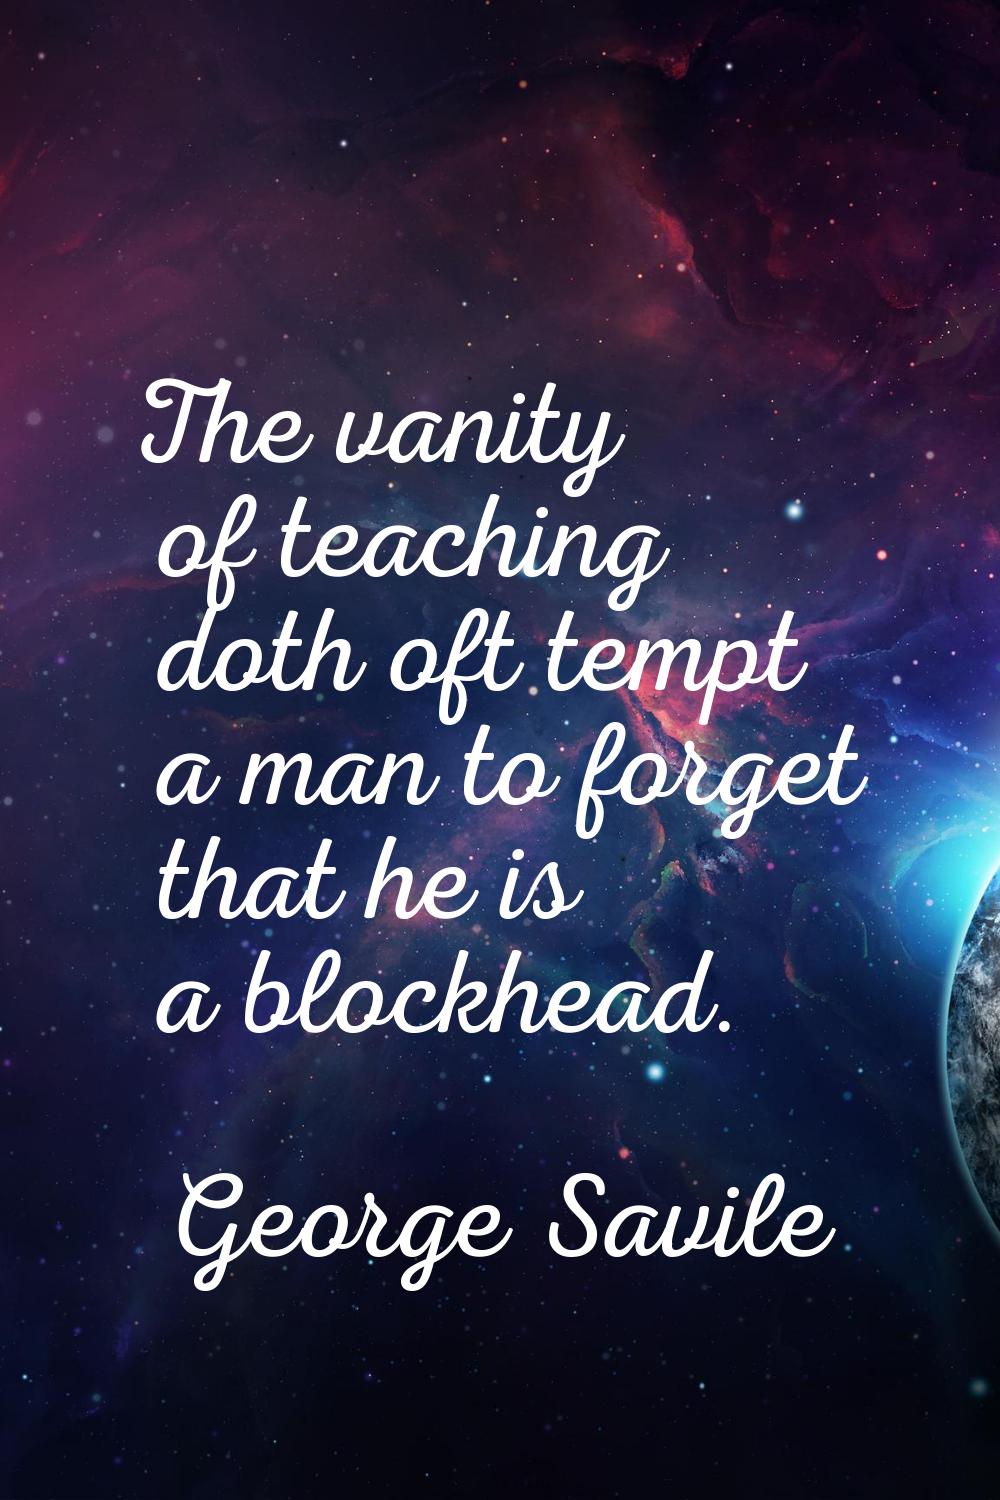 The vanity of teaching doth oft tempt a man to forget that he is a blockhead.